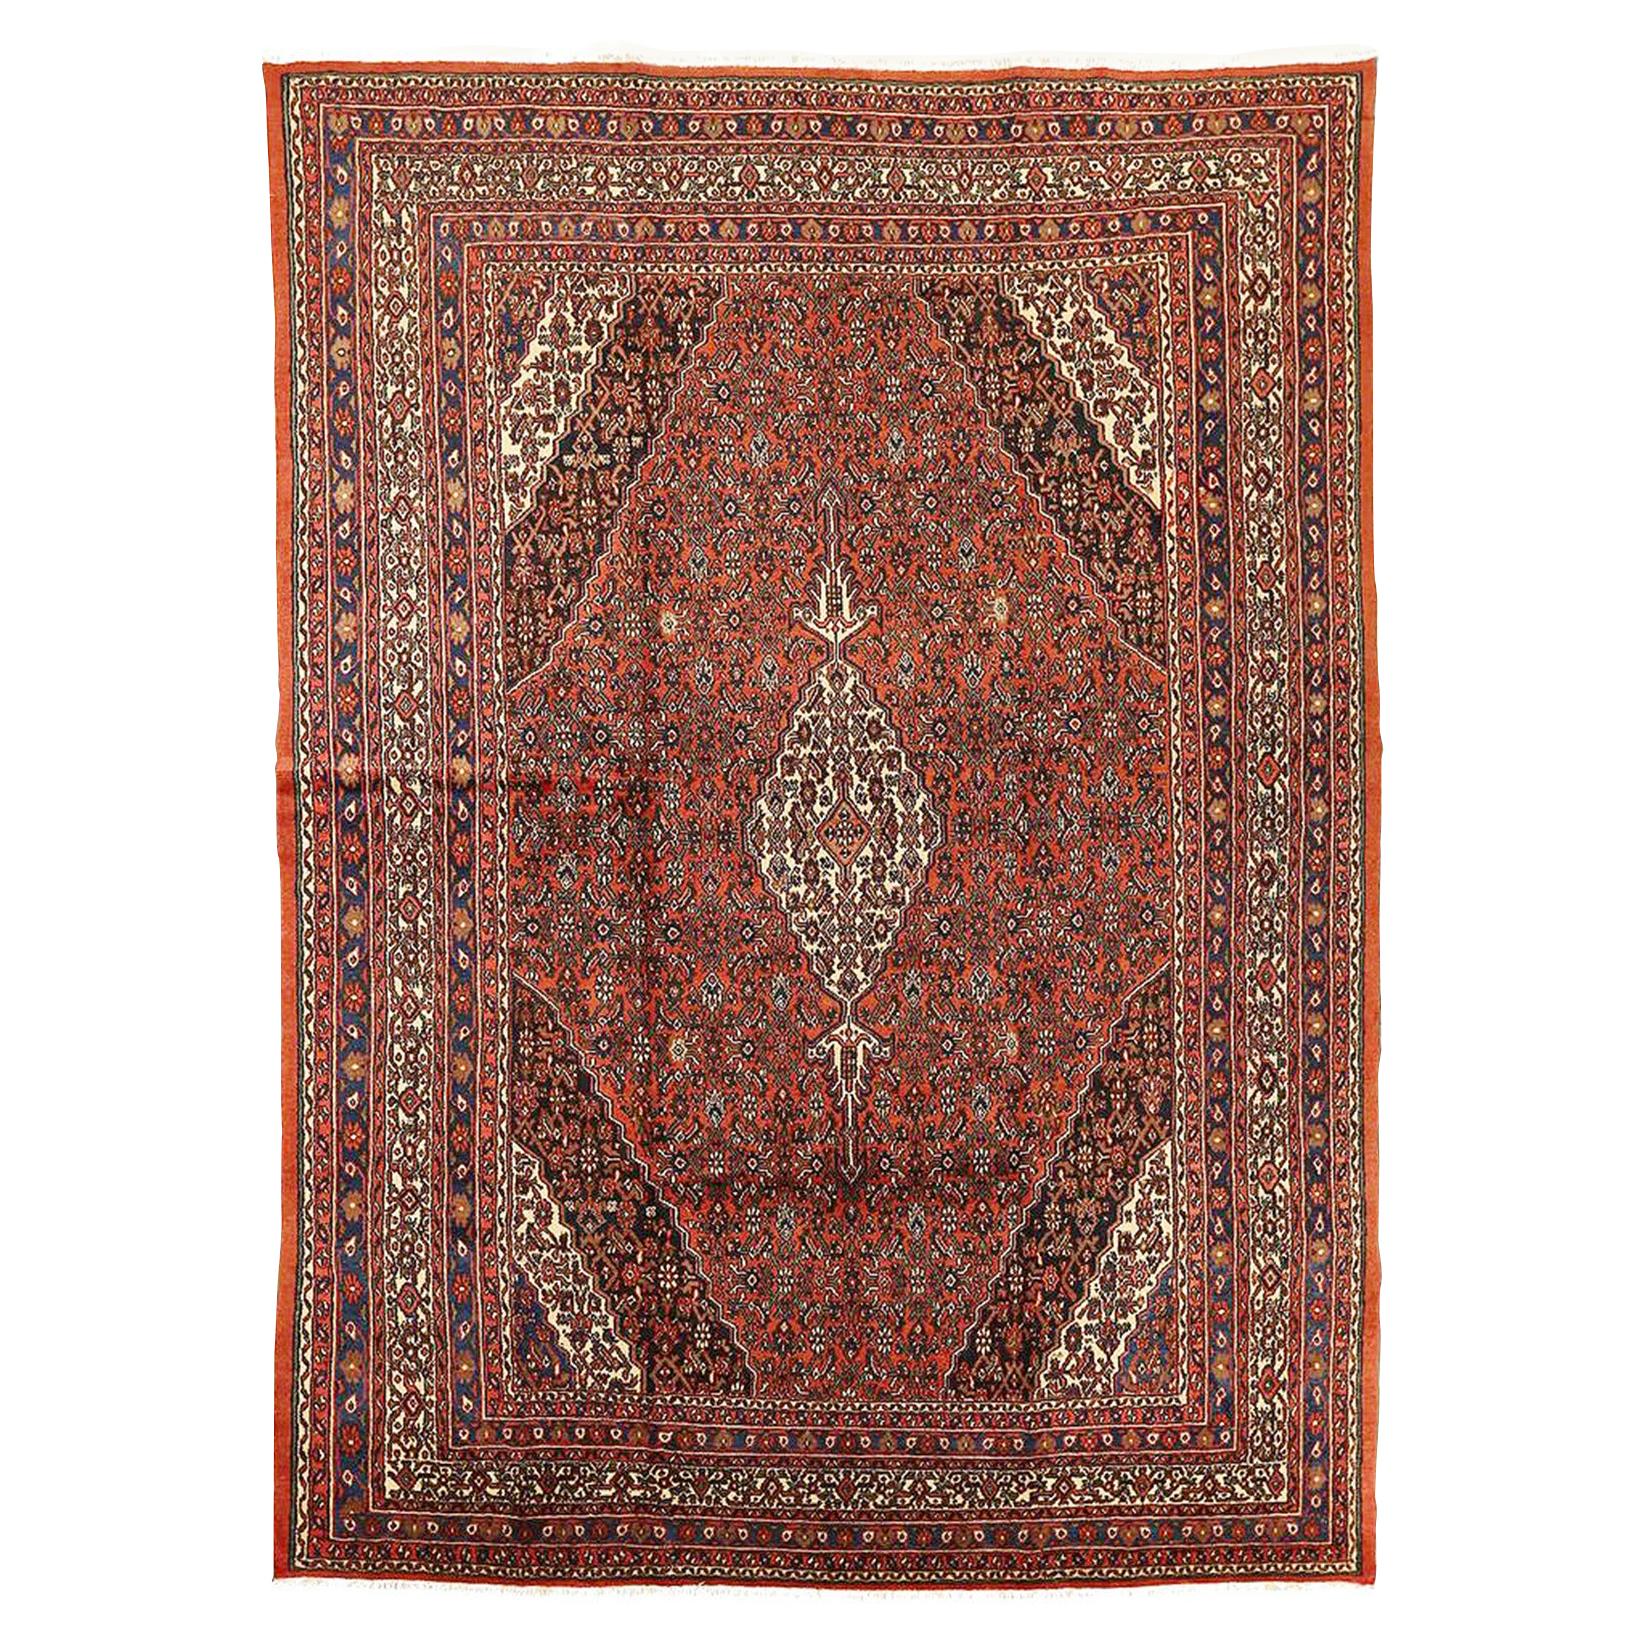 Antique Persian Hamadan Rug with Black and Red Floral Details on Ivory Field